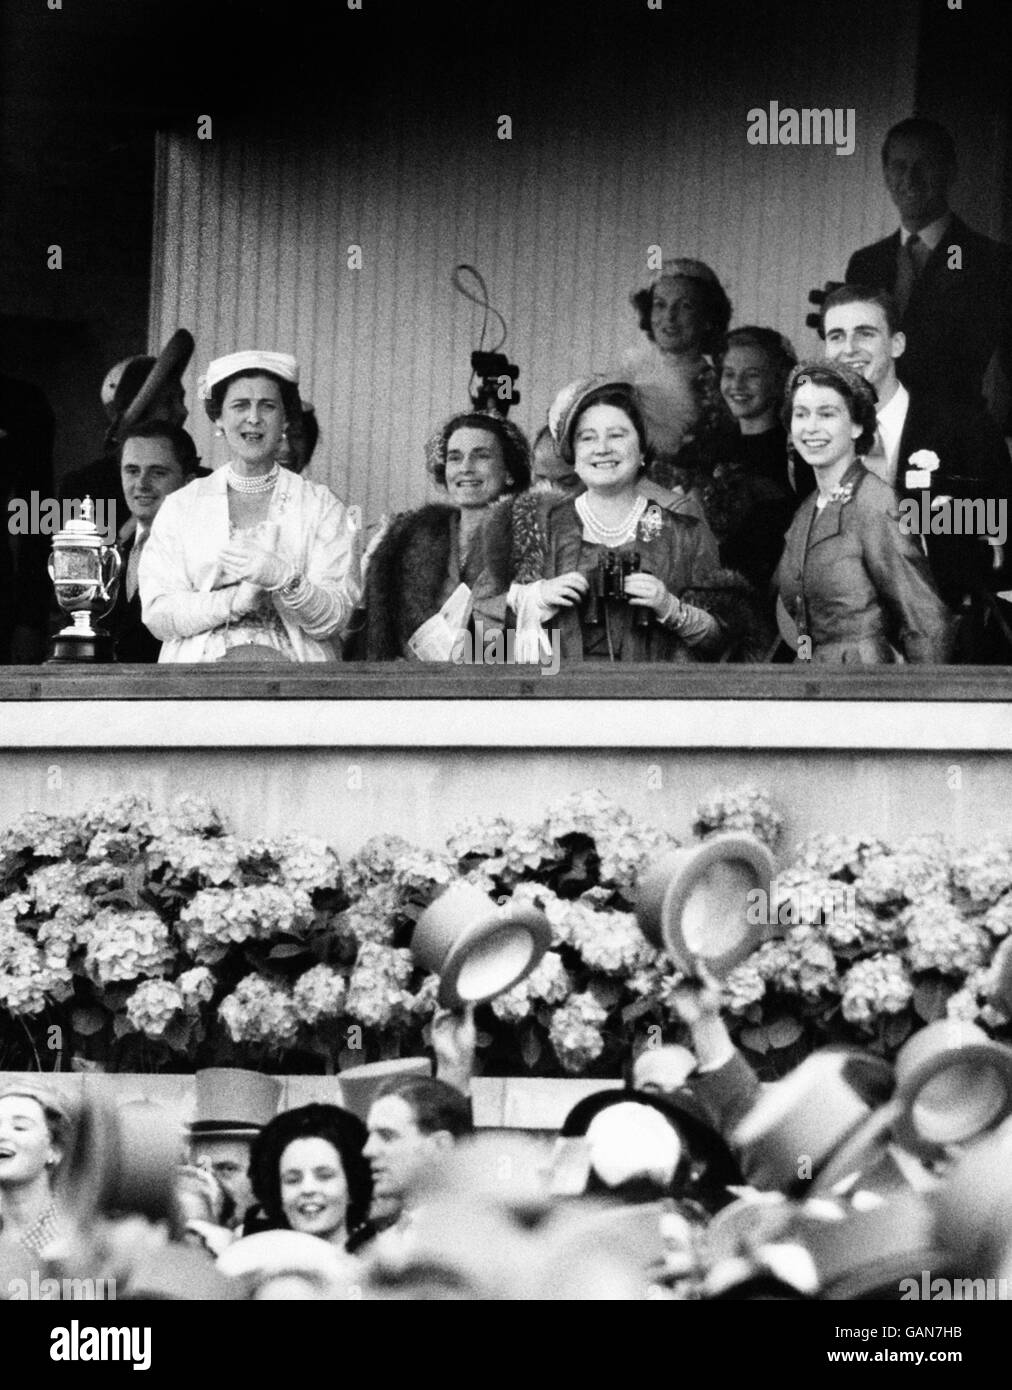 The Queen smiles happily and toppers are waved delightedly as, with other members of the Royal family in the Royal box, she see's her horse 'Choir Boy' win the Royal Hunt Cup, the big event of the day at Royal Ascot races today. Stock Photo